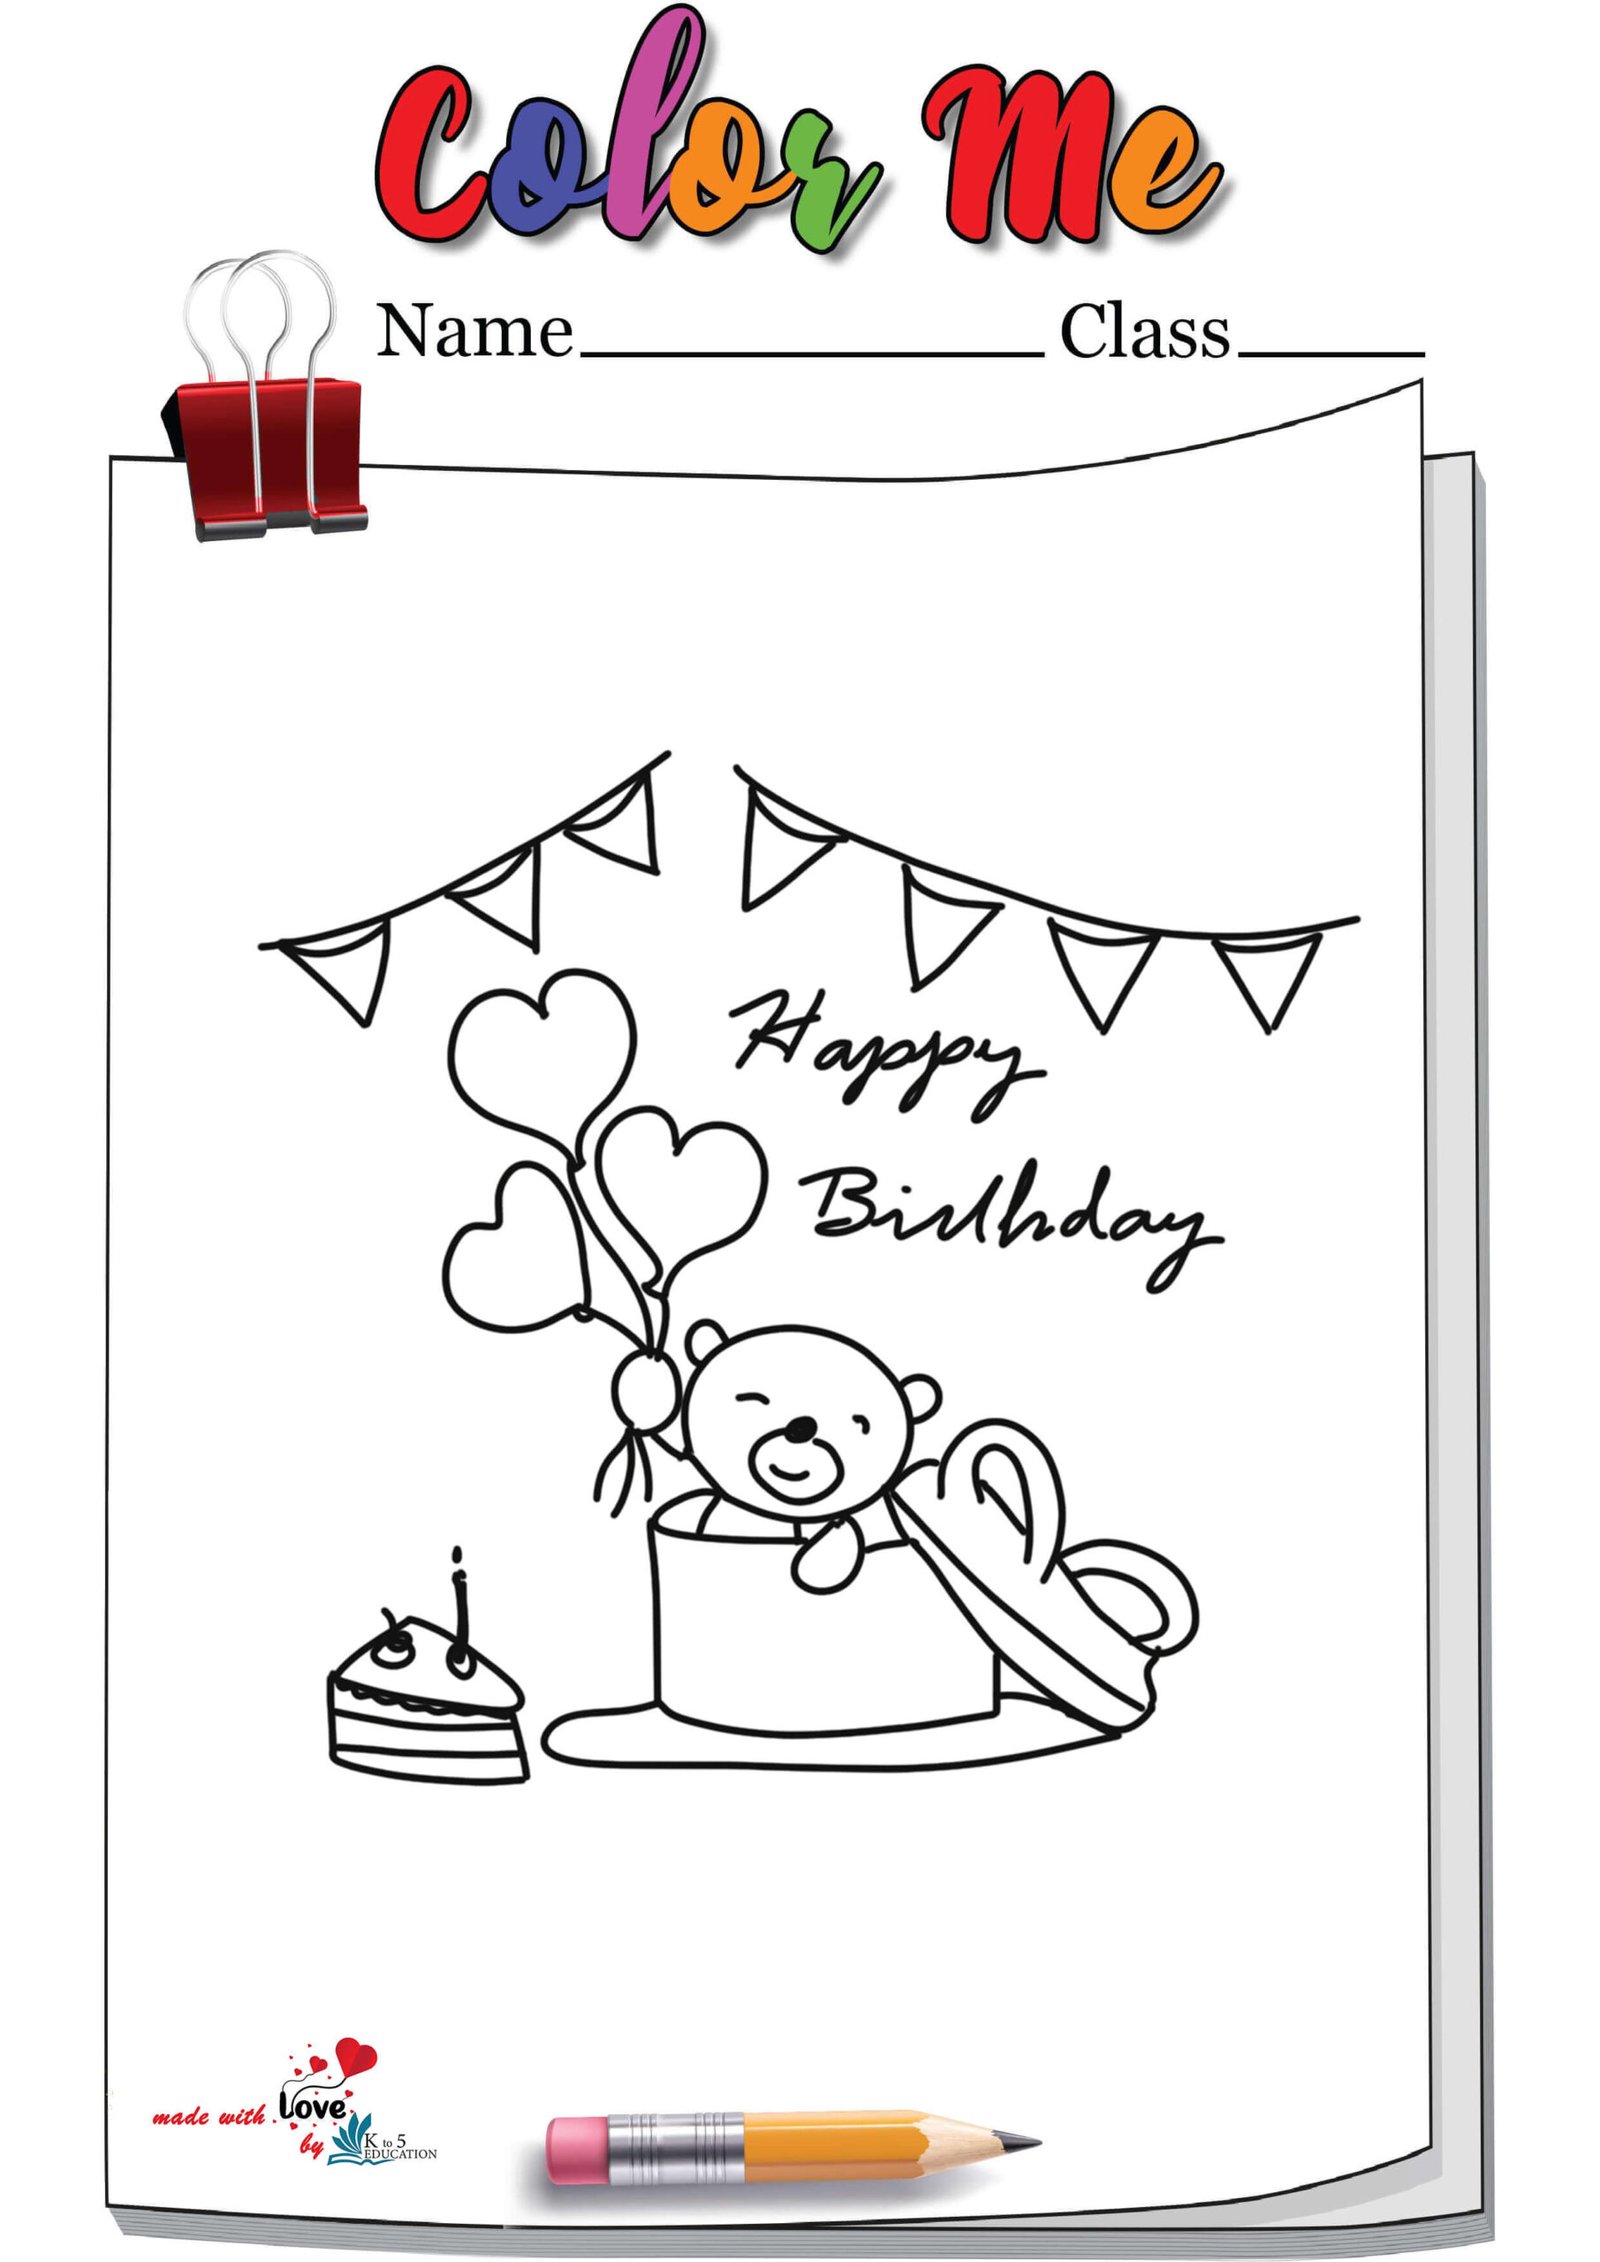 Teddy Bear For Birthday Gift Coloring Page